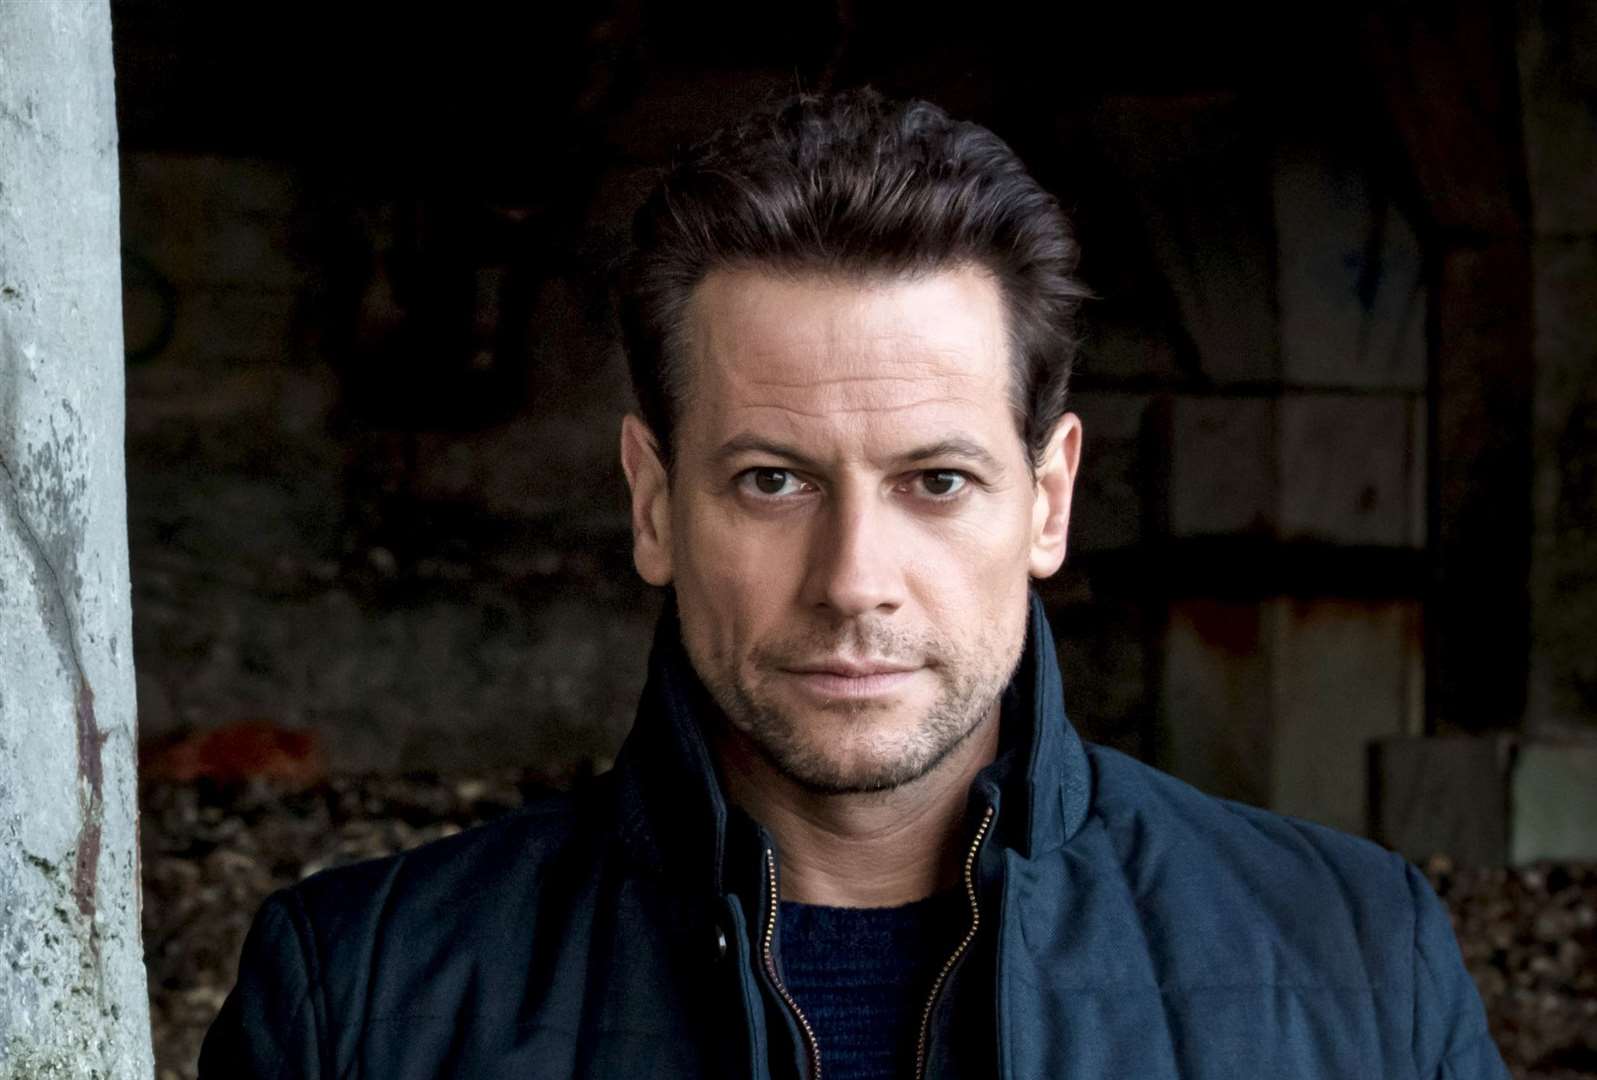 The second series will be a whodunnit focussing on who murdered rapist Andrew Earlham, played by Ioan Gruffudd